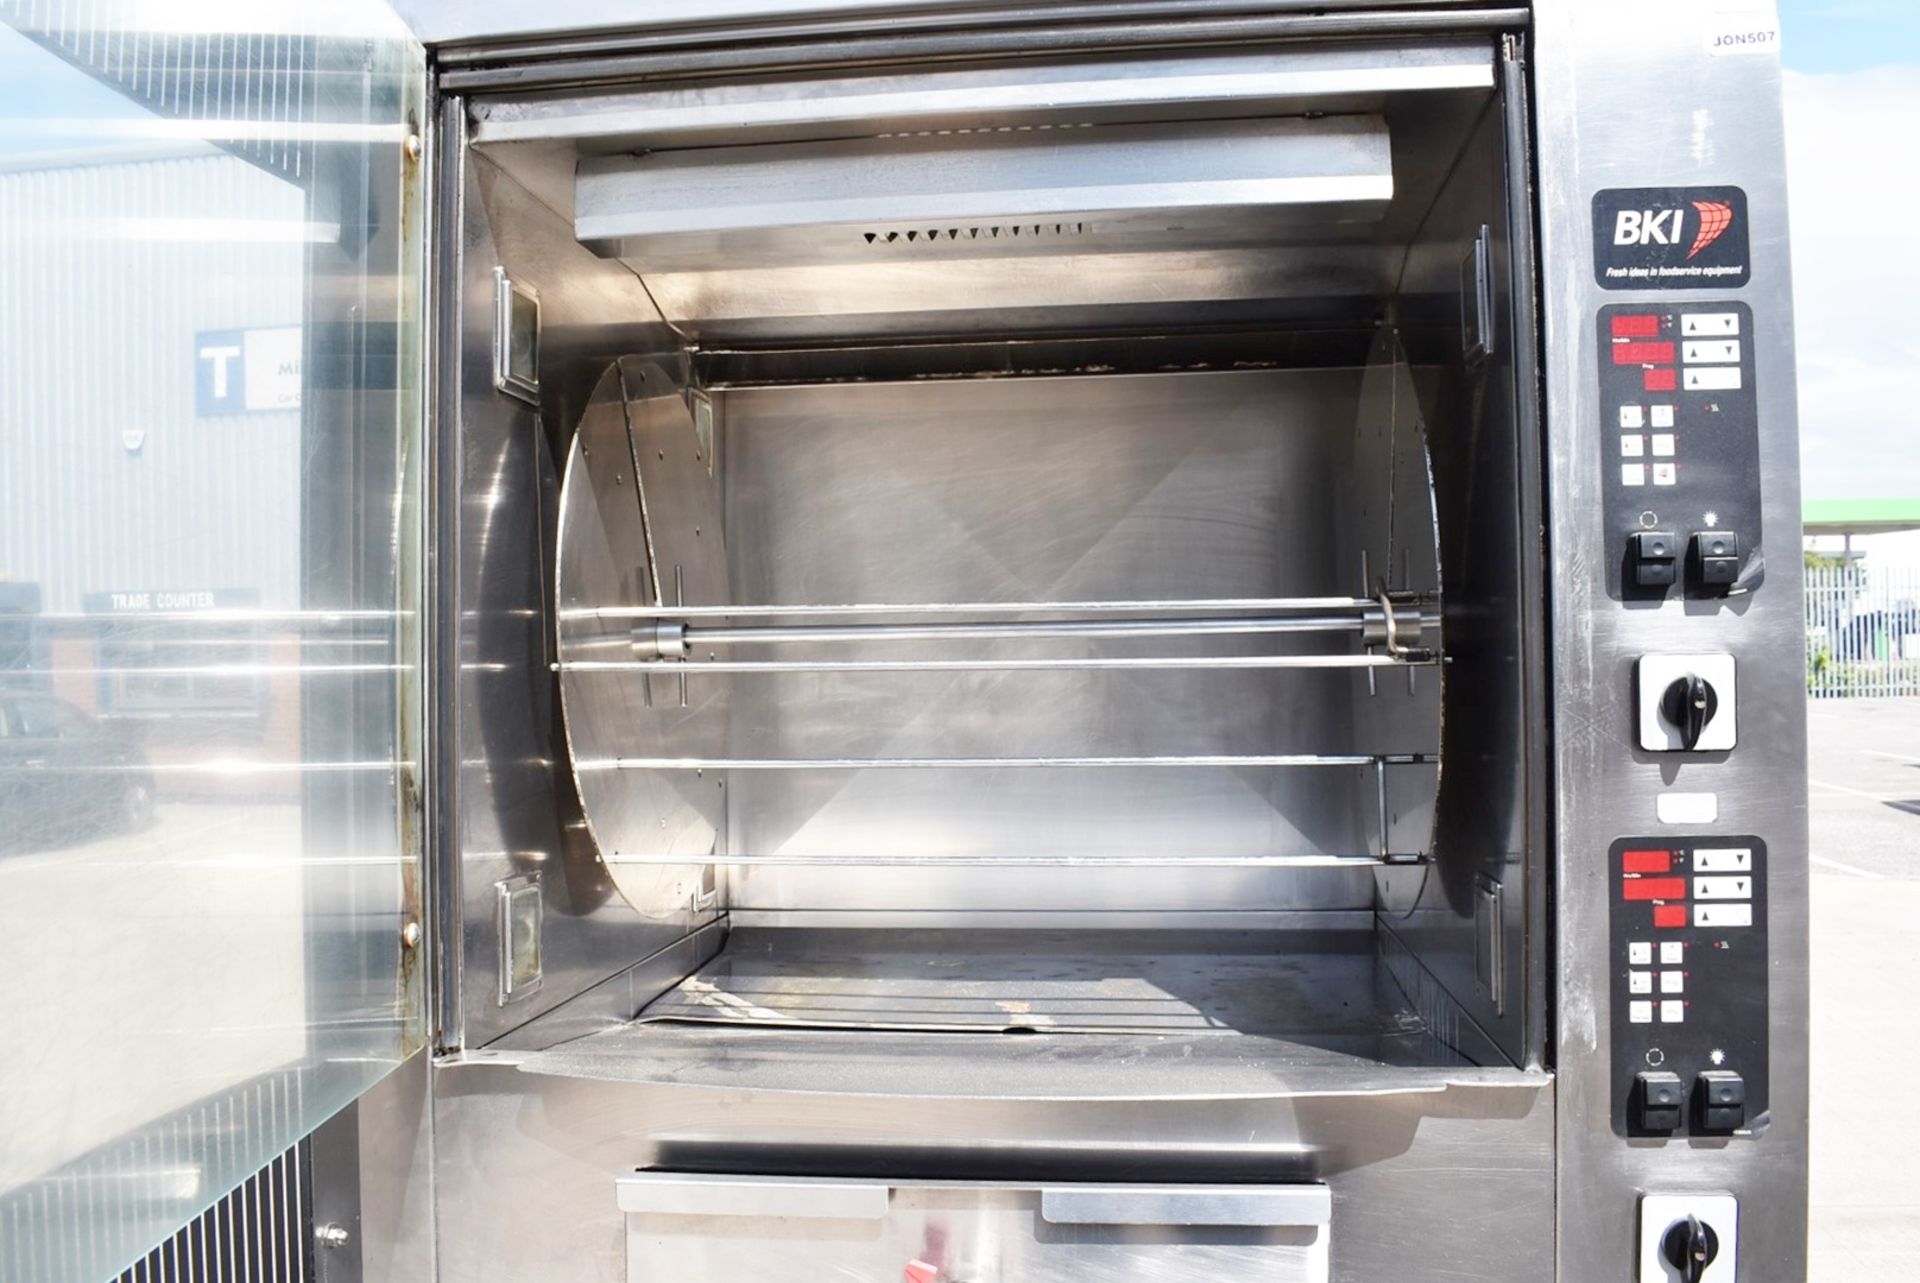 1 x BKI BBQ King Commercial Double Rotisserie Chicken Oven With Stand - Type VGUK16 - 3 Phase - Image 18 of 21